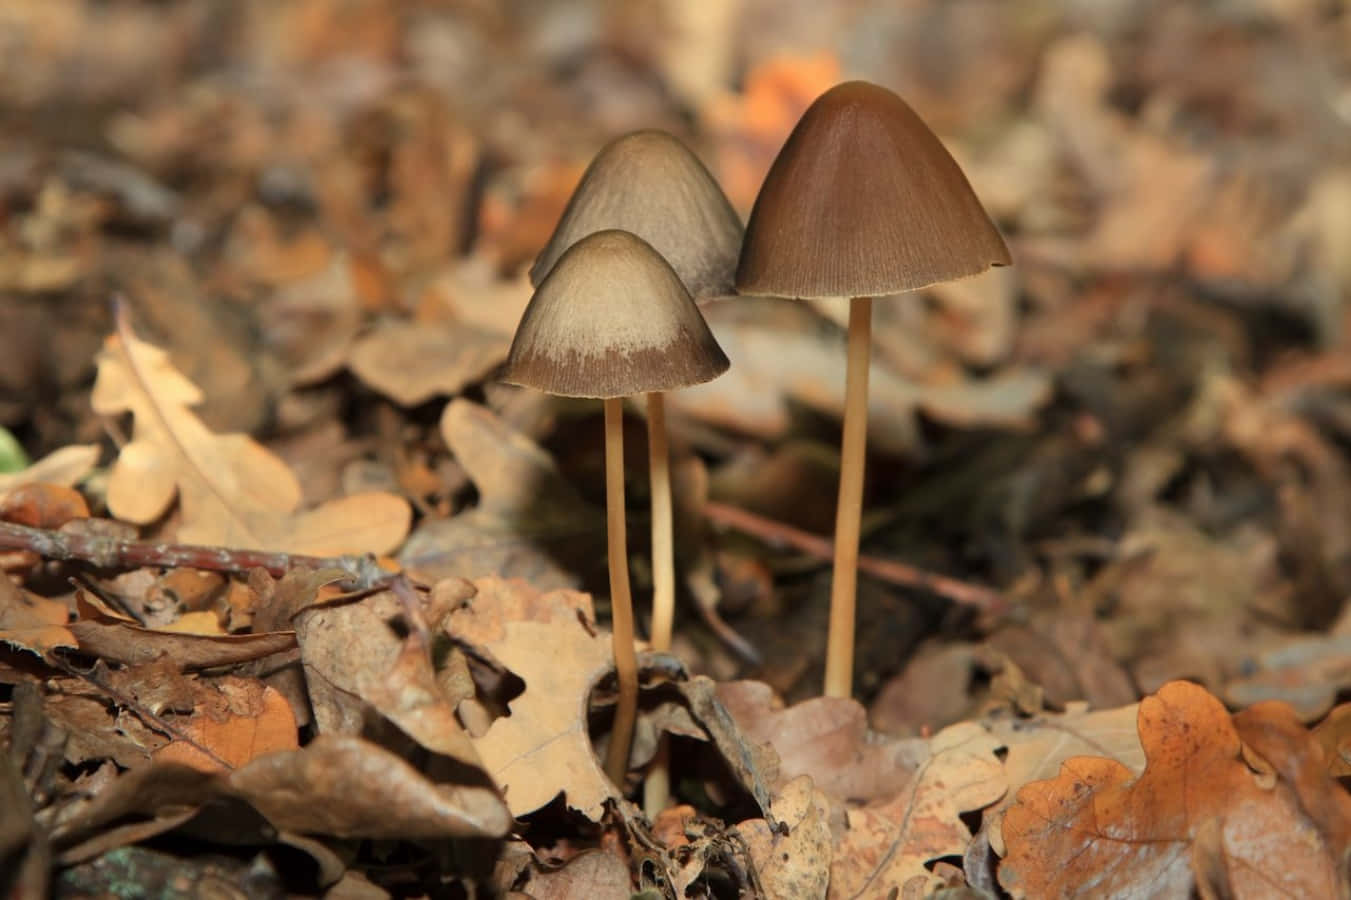 Three Mushrooms On The Ground In The Fall